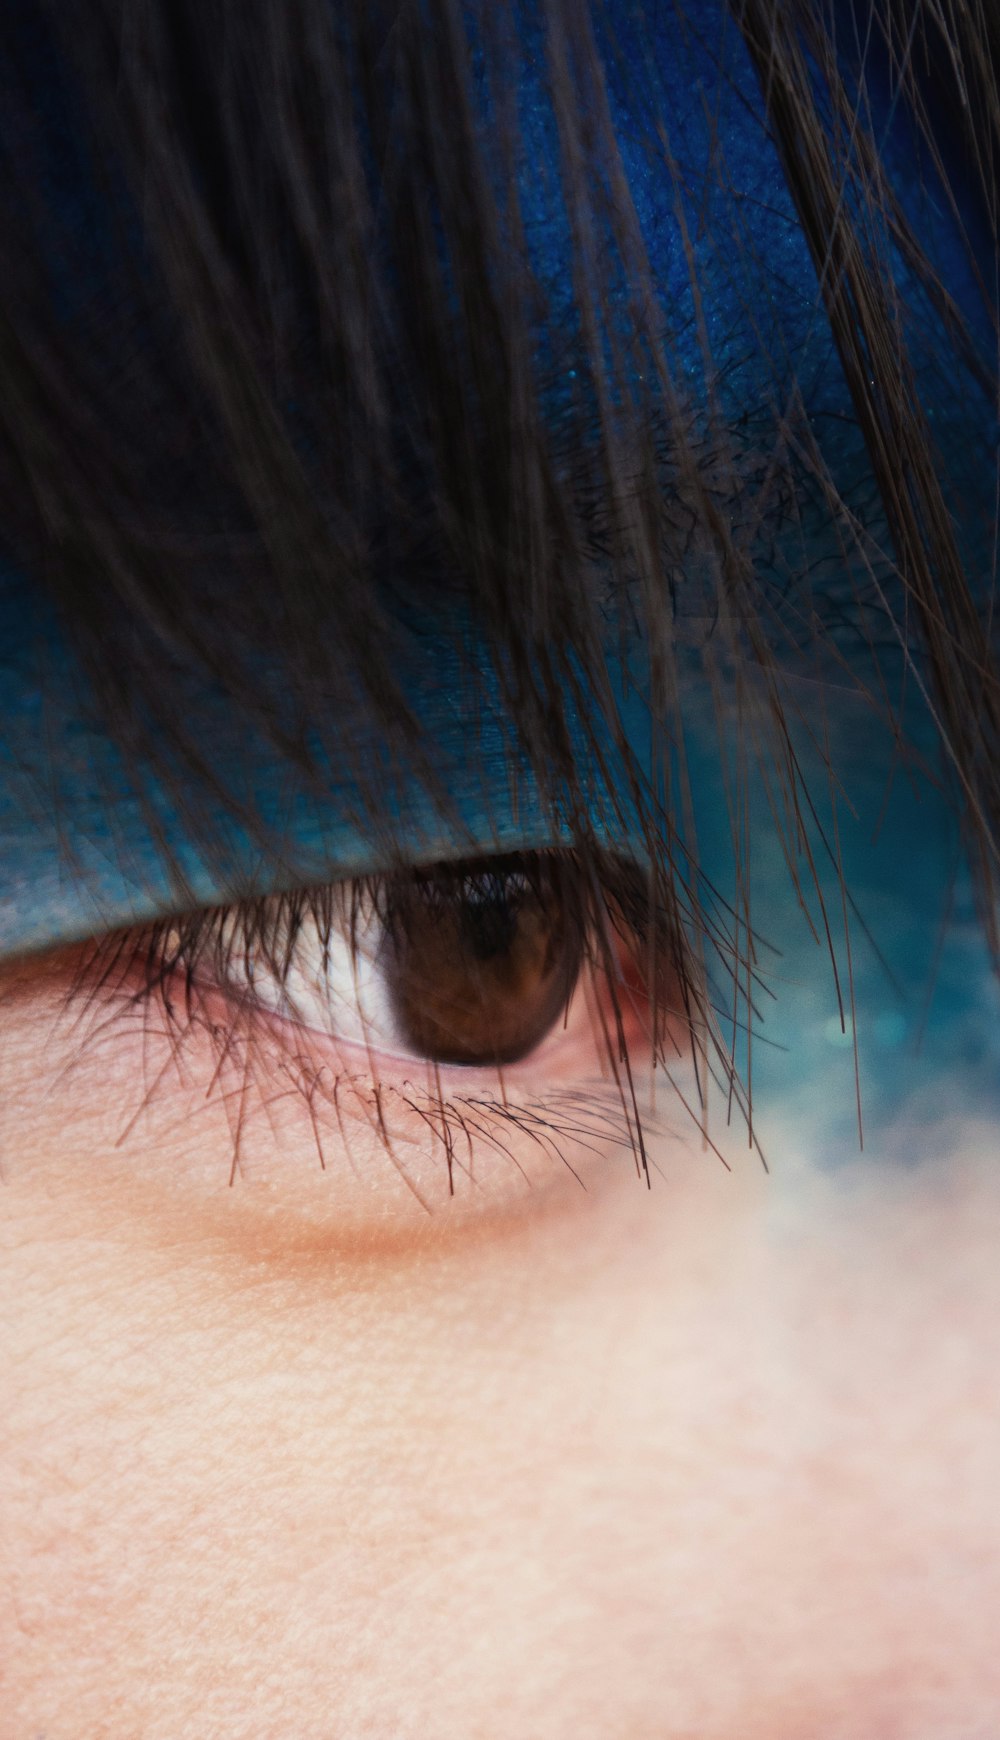 a close up of a person's eye with blue makeup